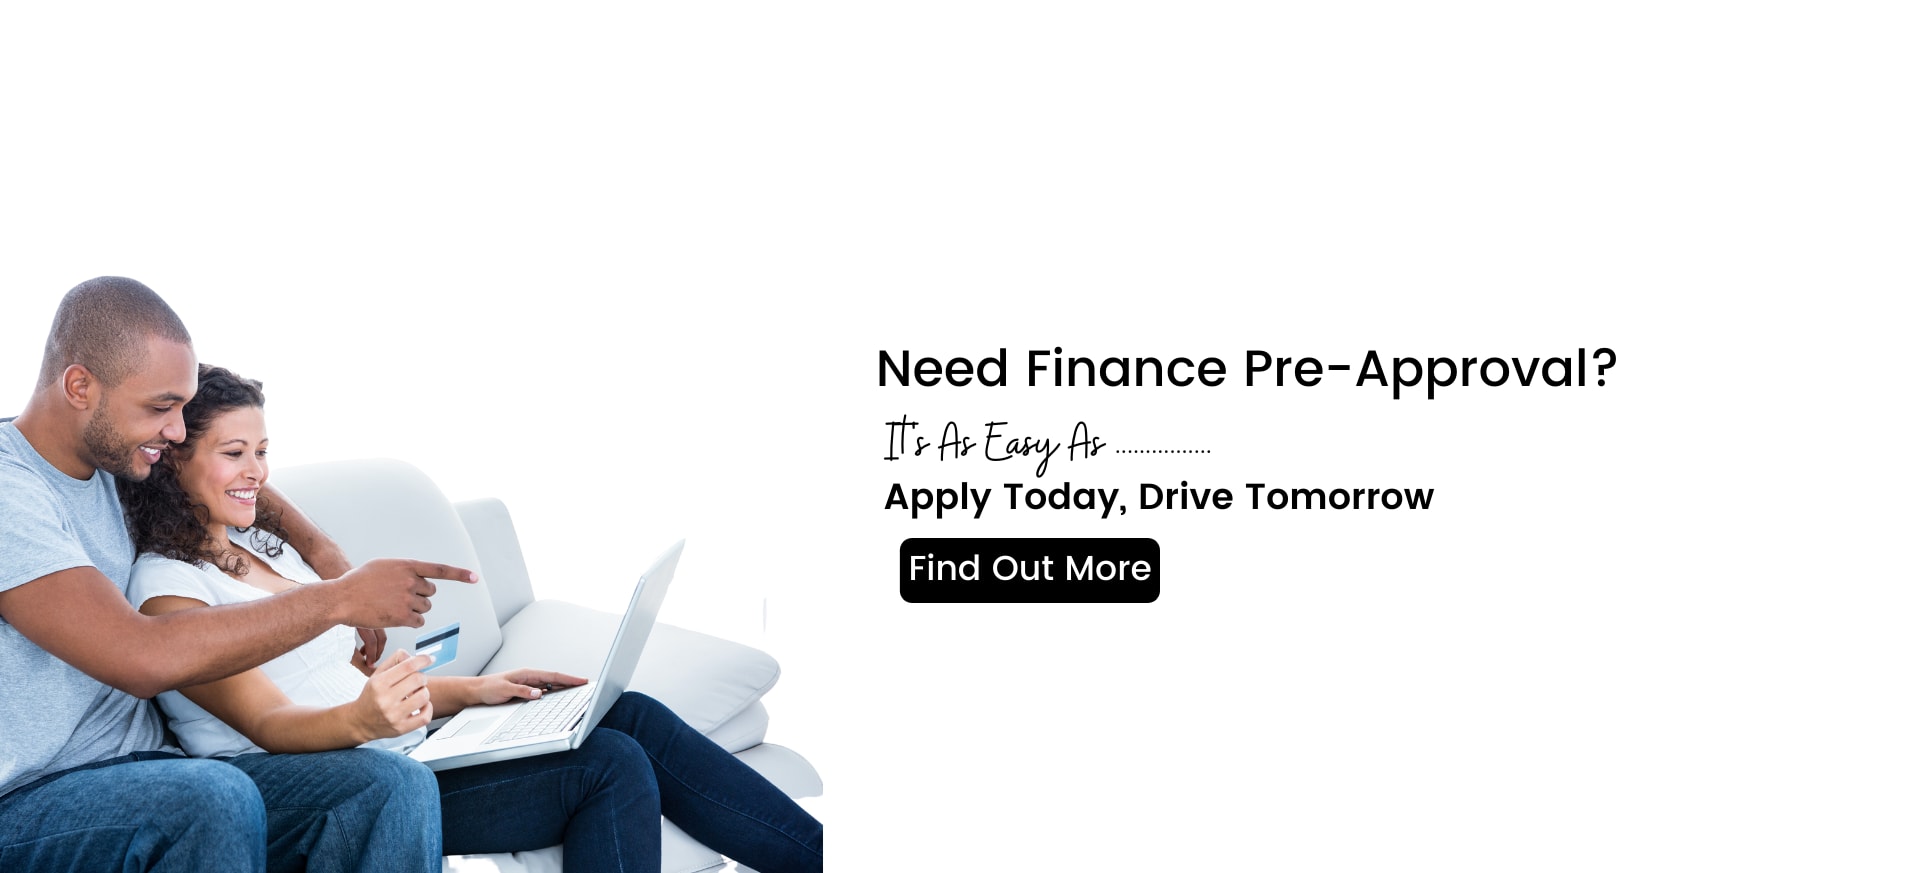 Need Finance Pre-Approval? It's As Easy As...Apply Today, Drive Tomorrow